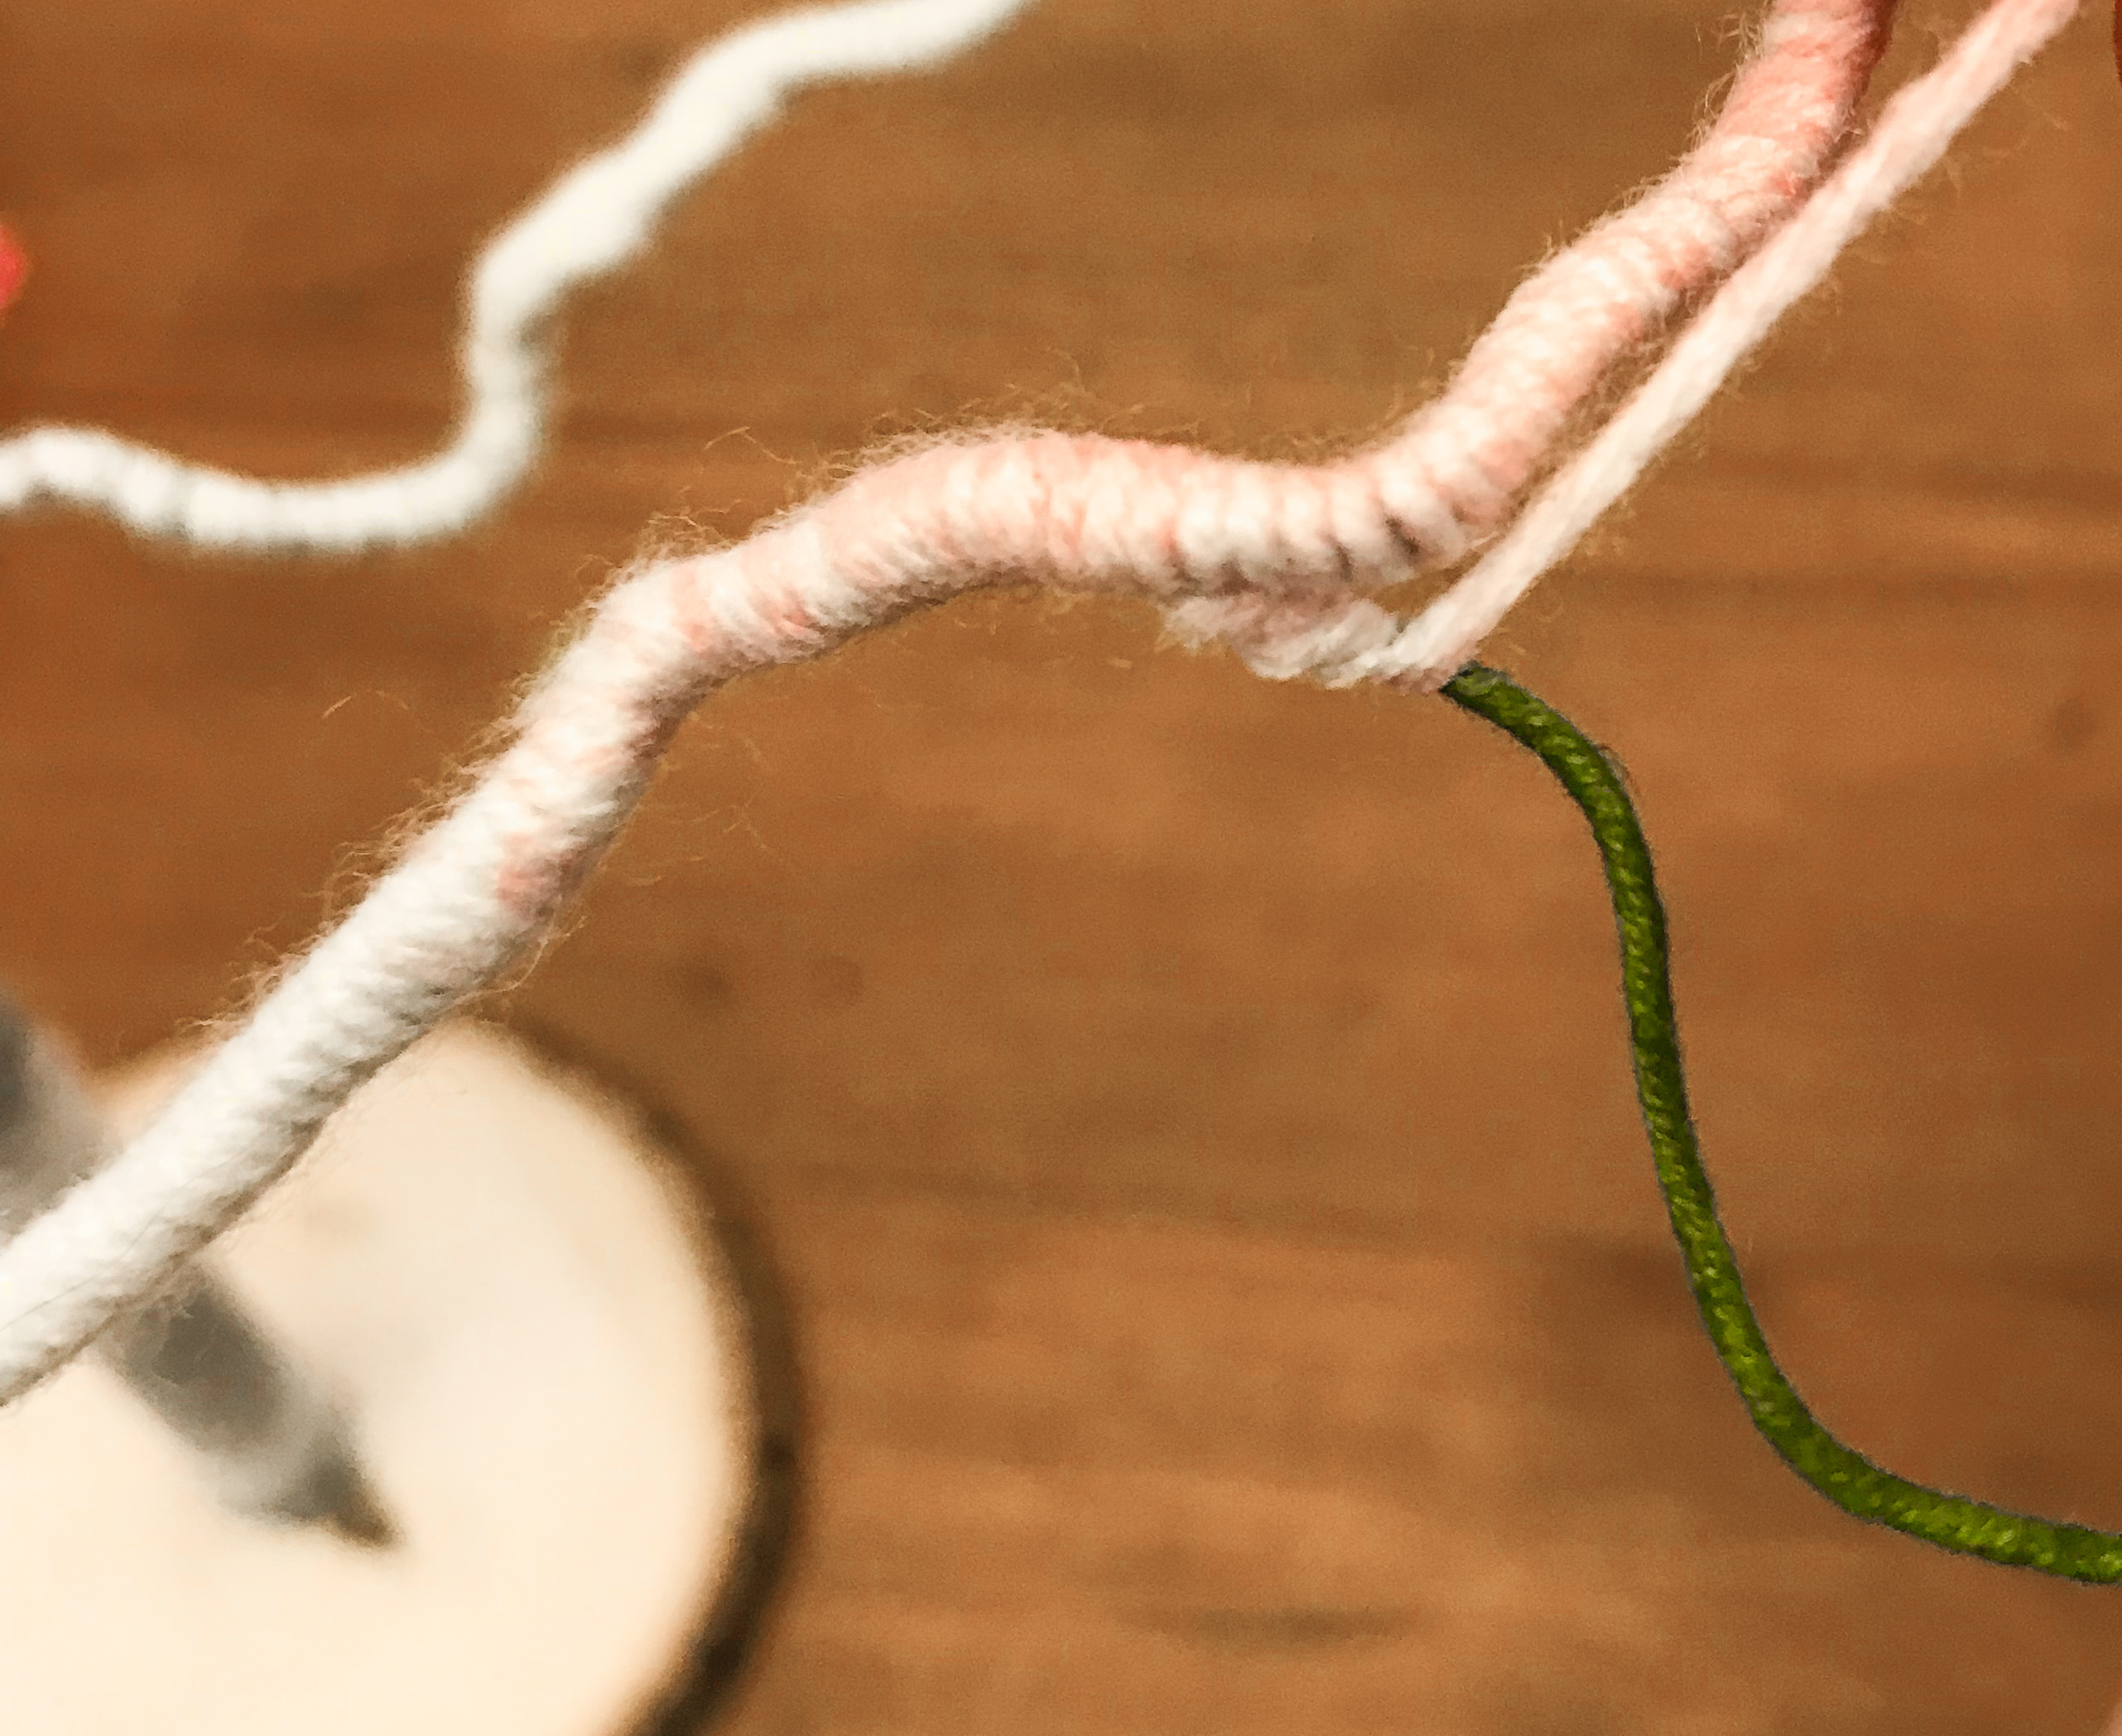 Yarn being tightly wrapped along green floral stem branch. 